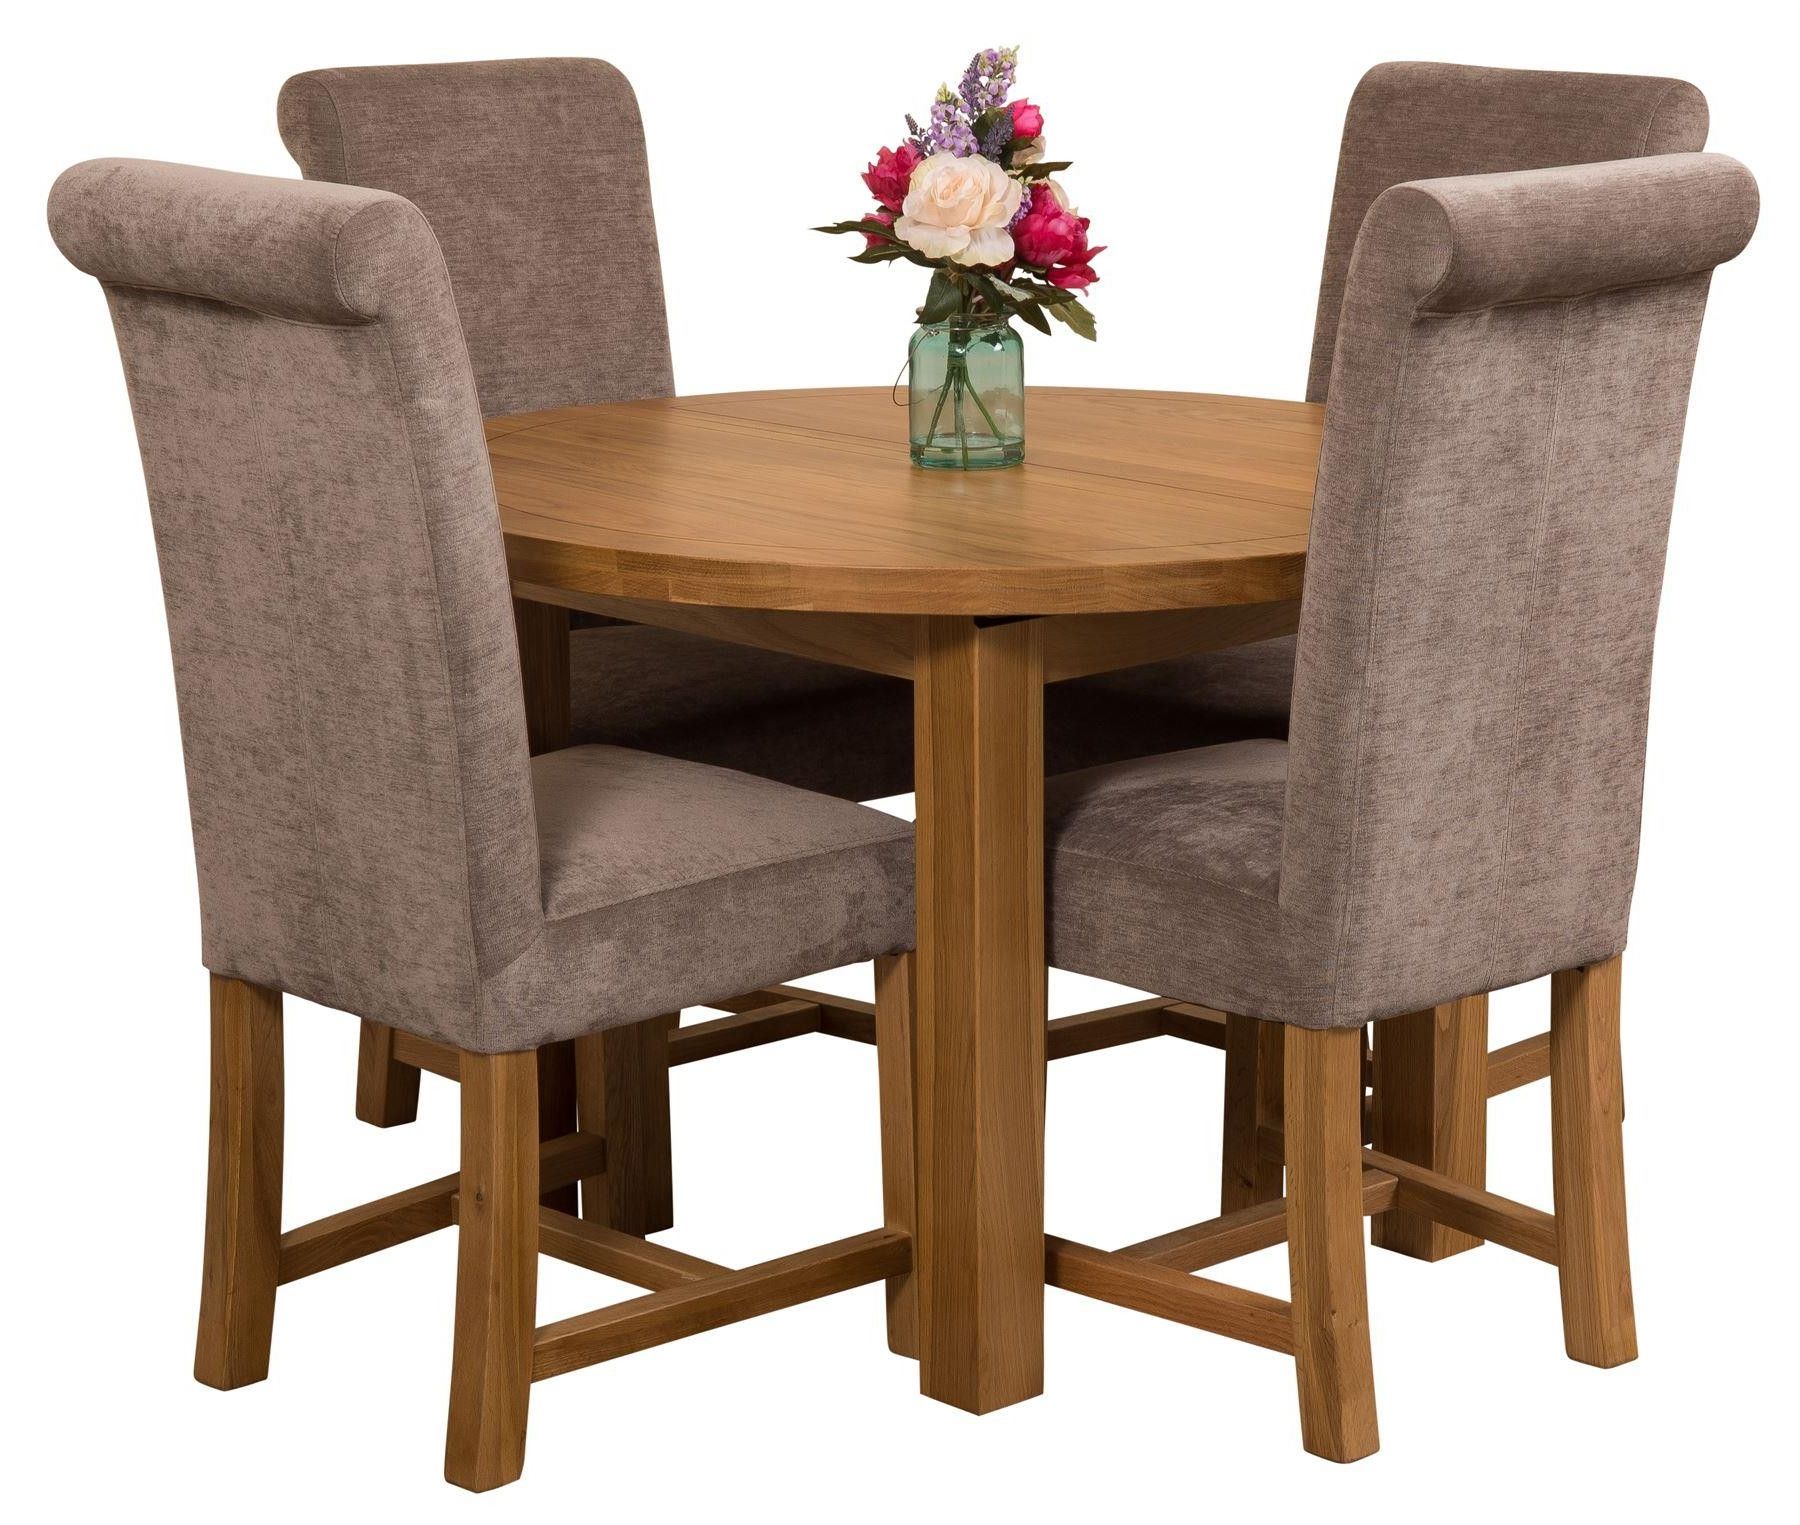 Edmonton Solid Oak Extending Oval Dining Table With 4 Washington Dining Pertaining To Most Popular Extendable Oval Dining Sets (View 8 of 15)